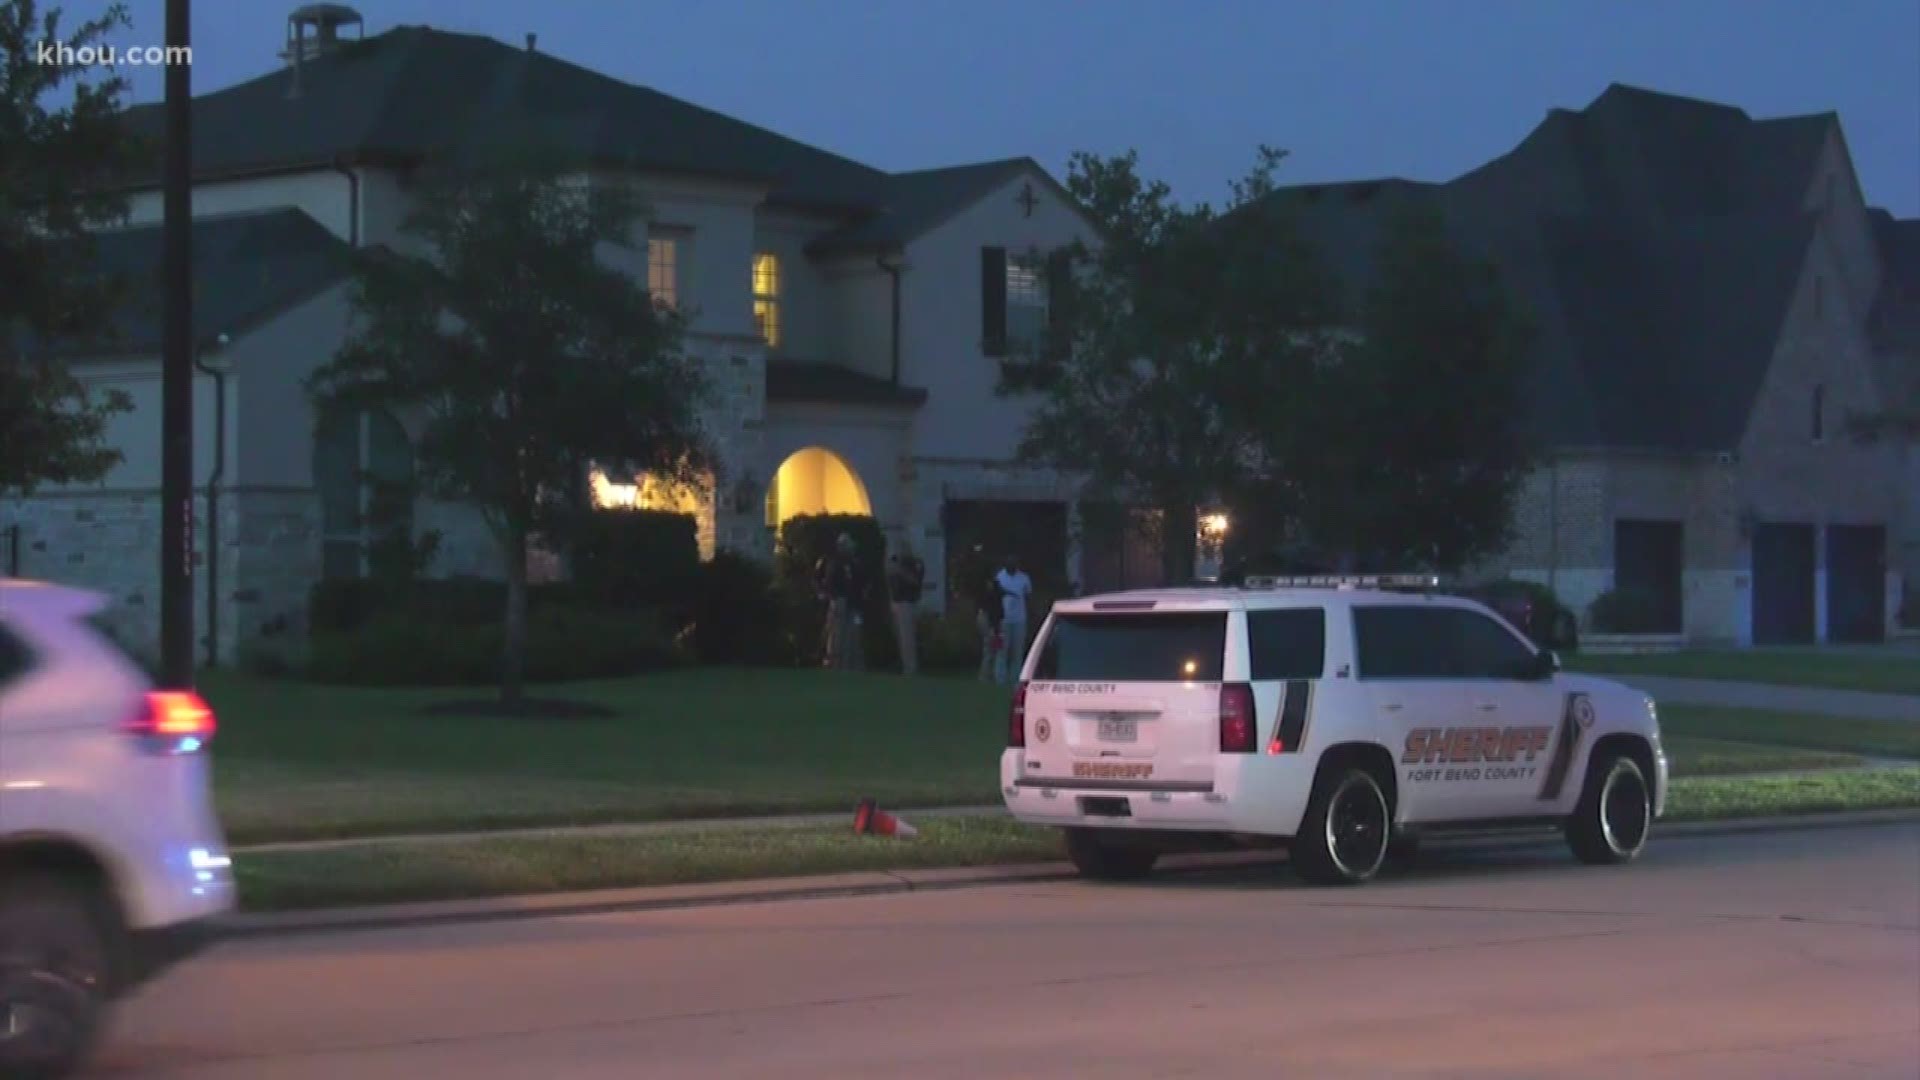 A 3-year-old was flown to a hospital after accidentally shooting himself in Katy.